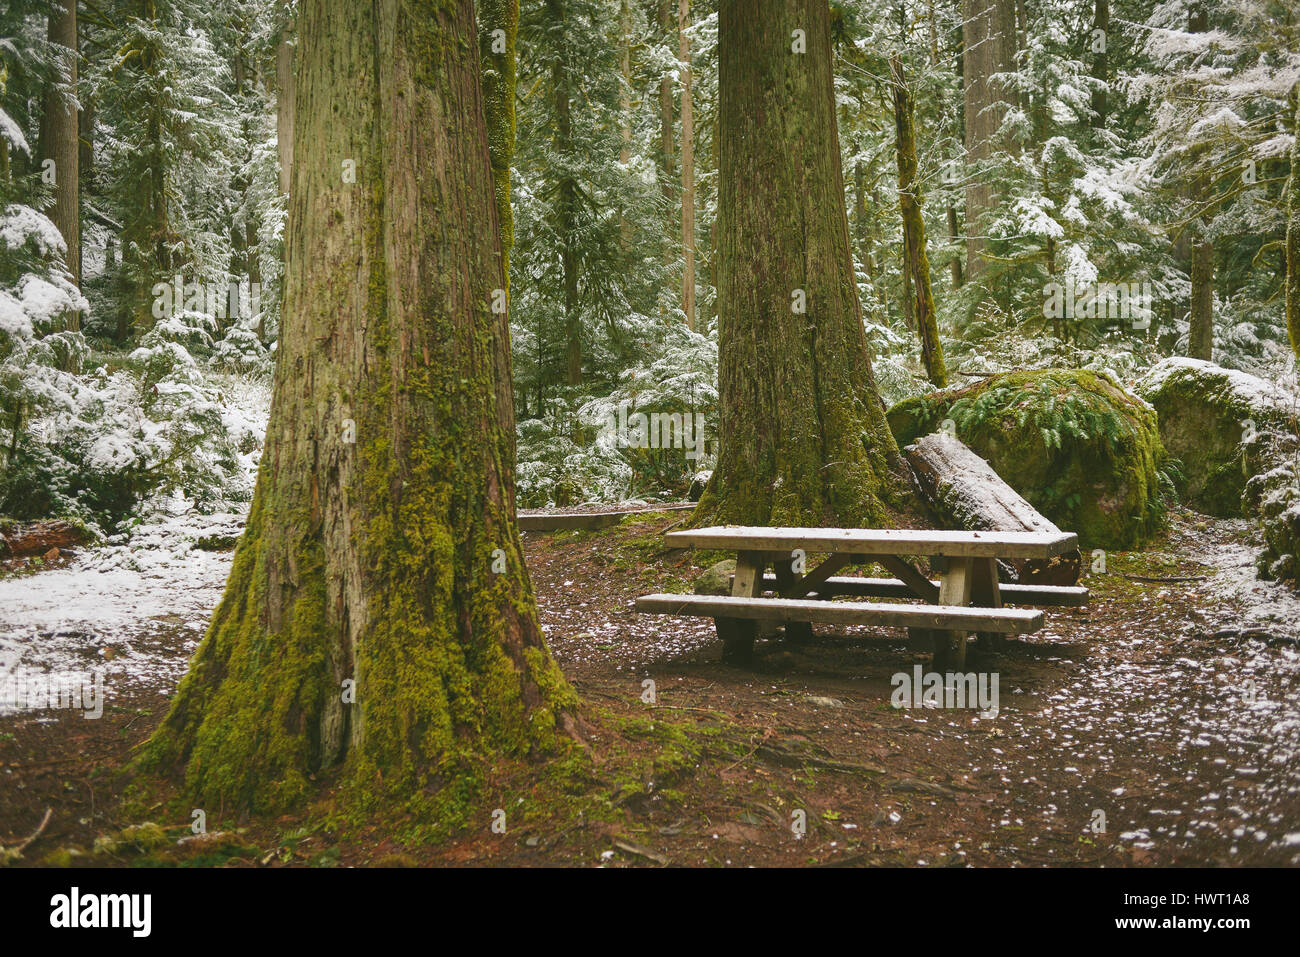 Picnic bench in forest during winter Stock Photo